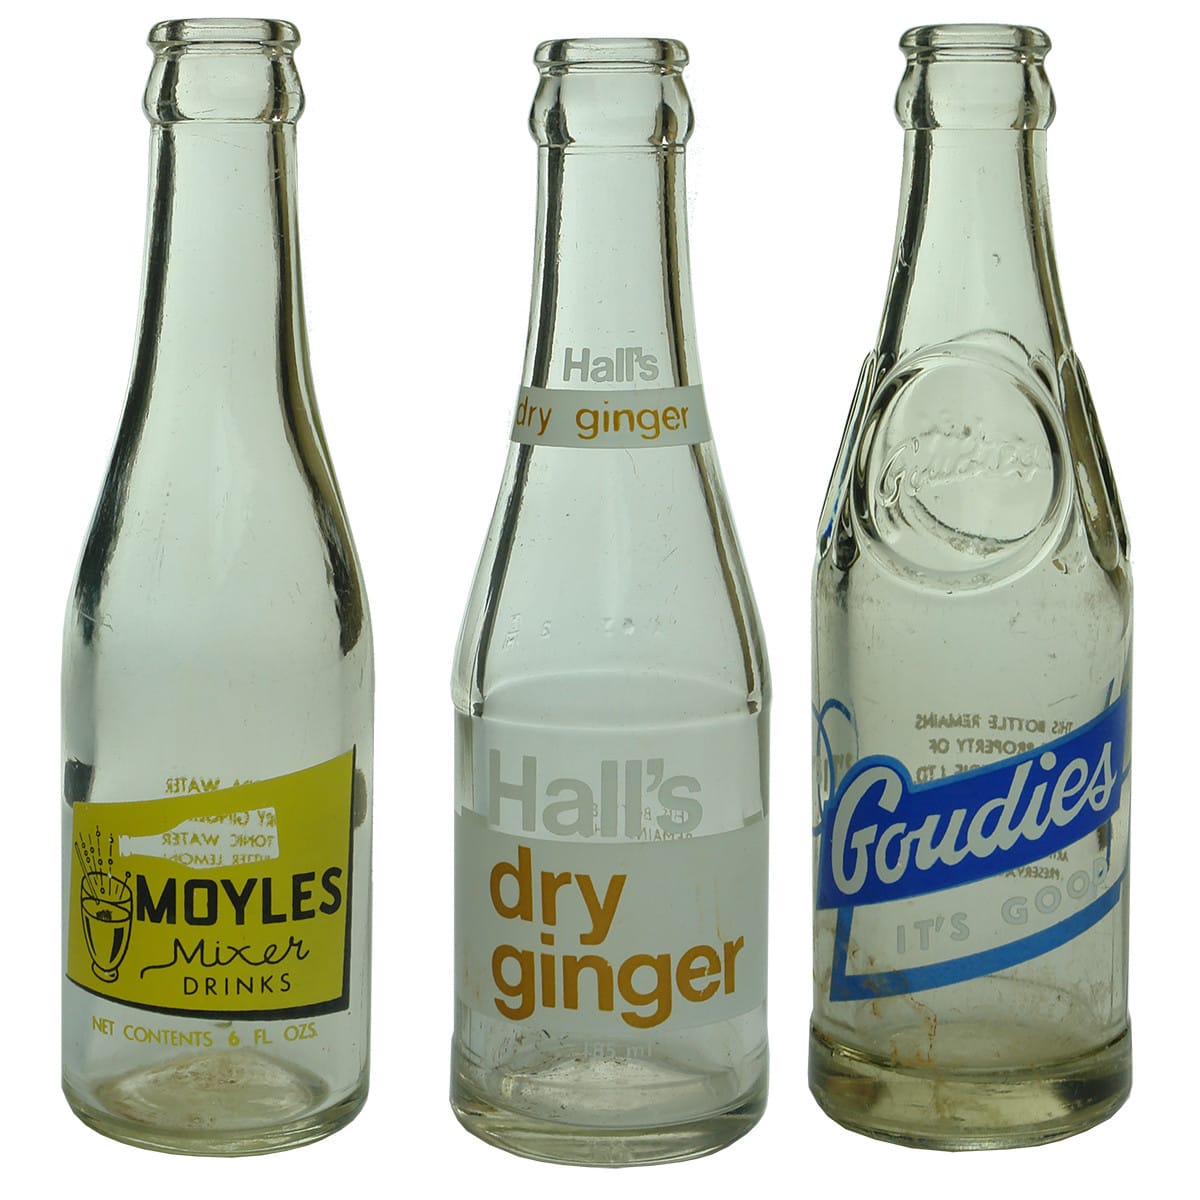 3 small Ceramic Label Crown Seals. Moyles Mixer Drinks. Hall's Dry Ginger and Goudies. (South Australia)